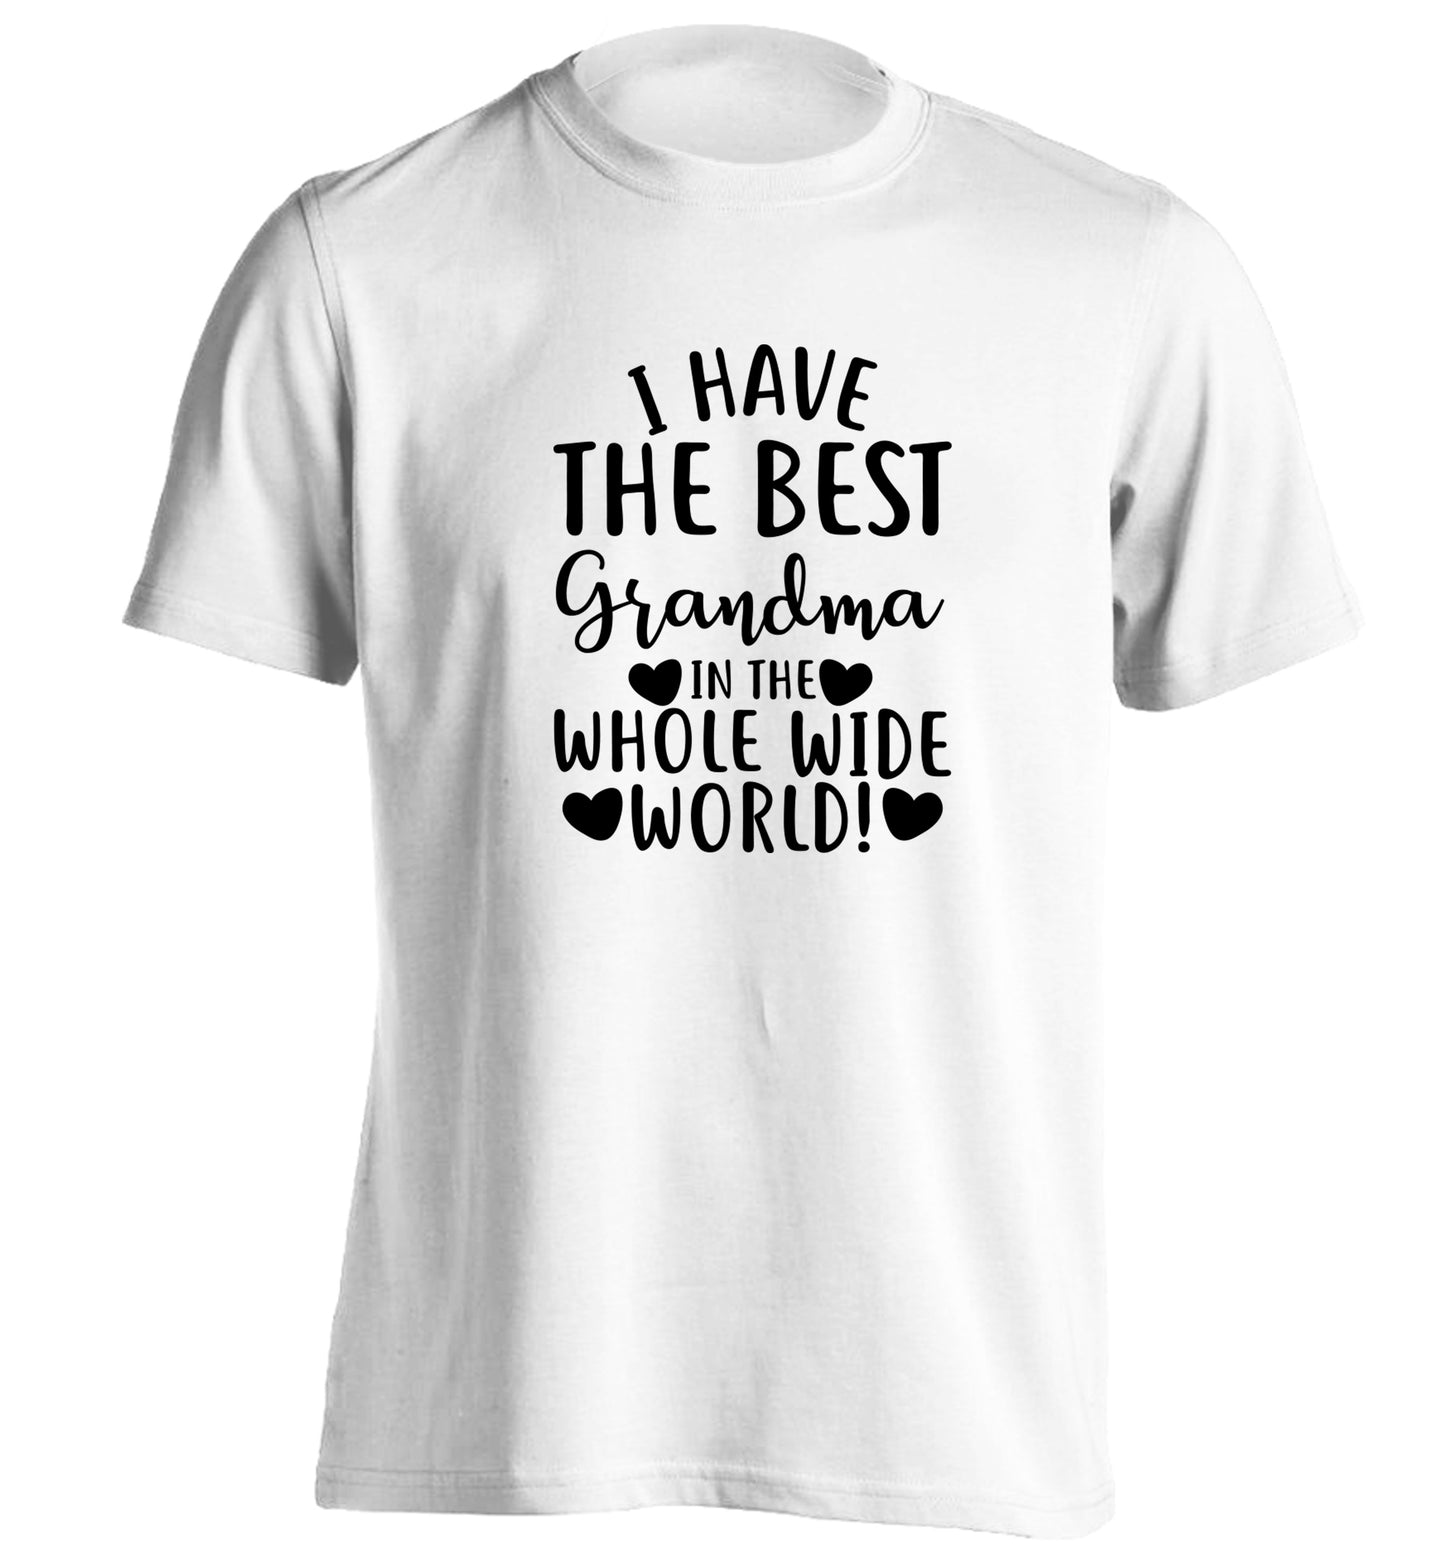 I have the best grandma in the whole wide world! adults unisex white Tshirt 2XL